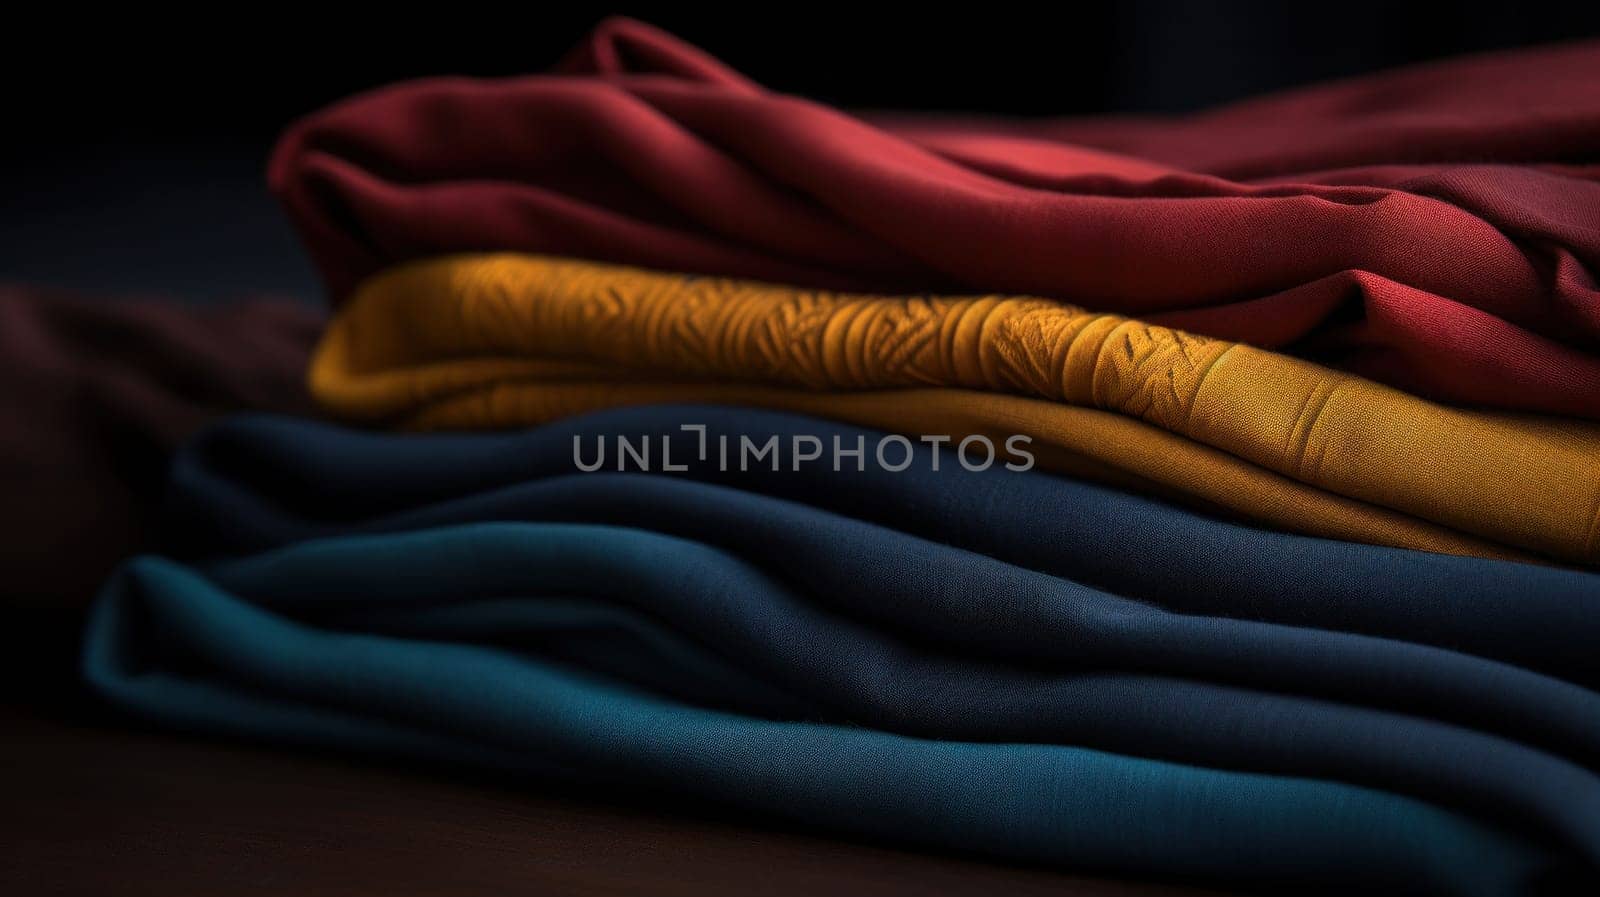 A stack of folded clothes on a table with light shining through